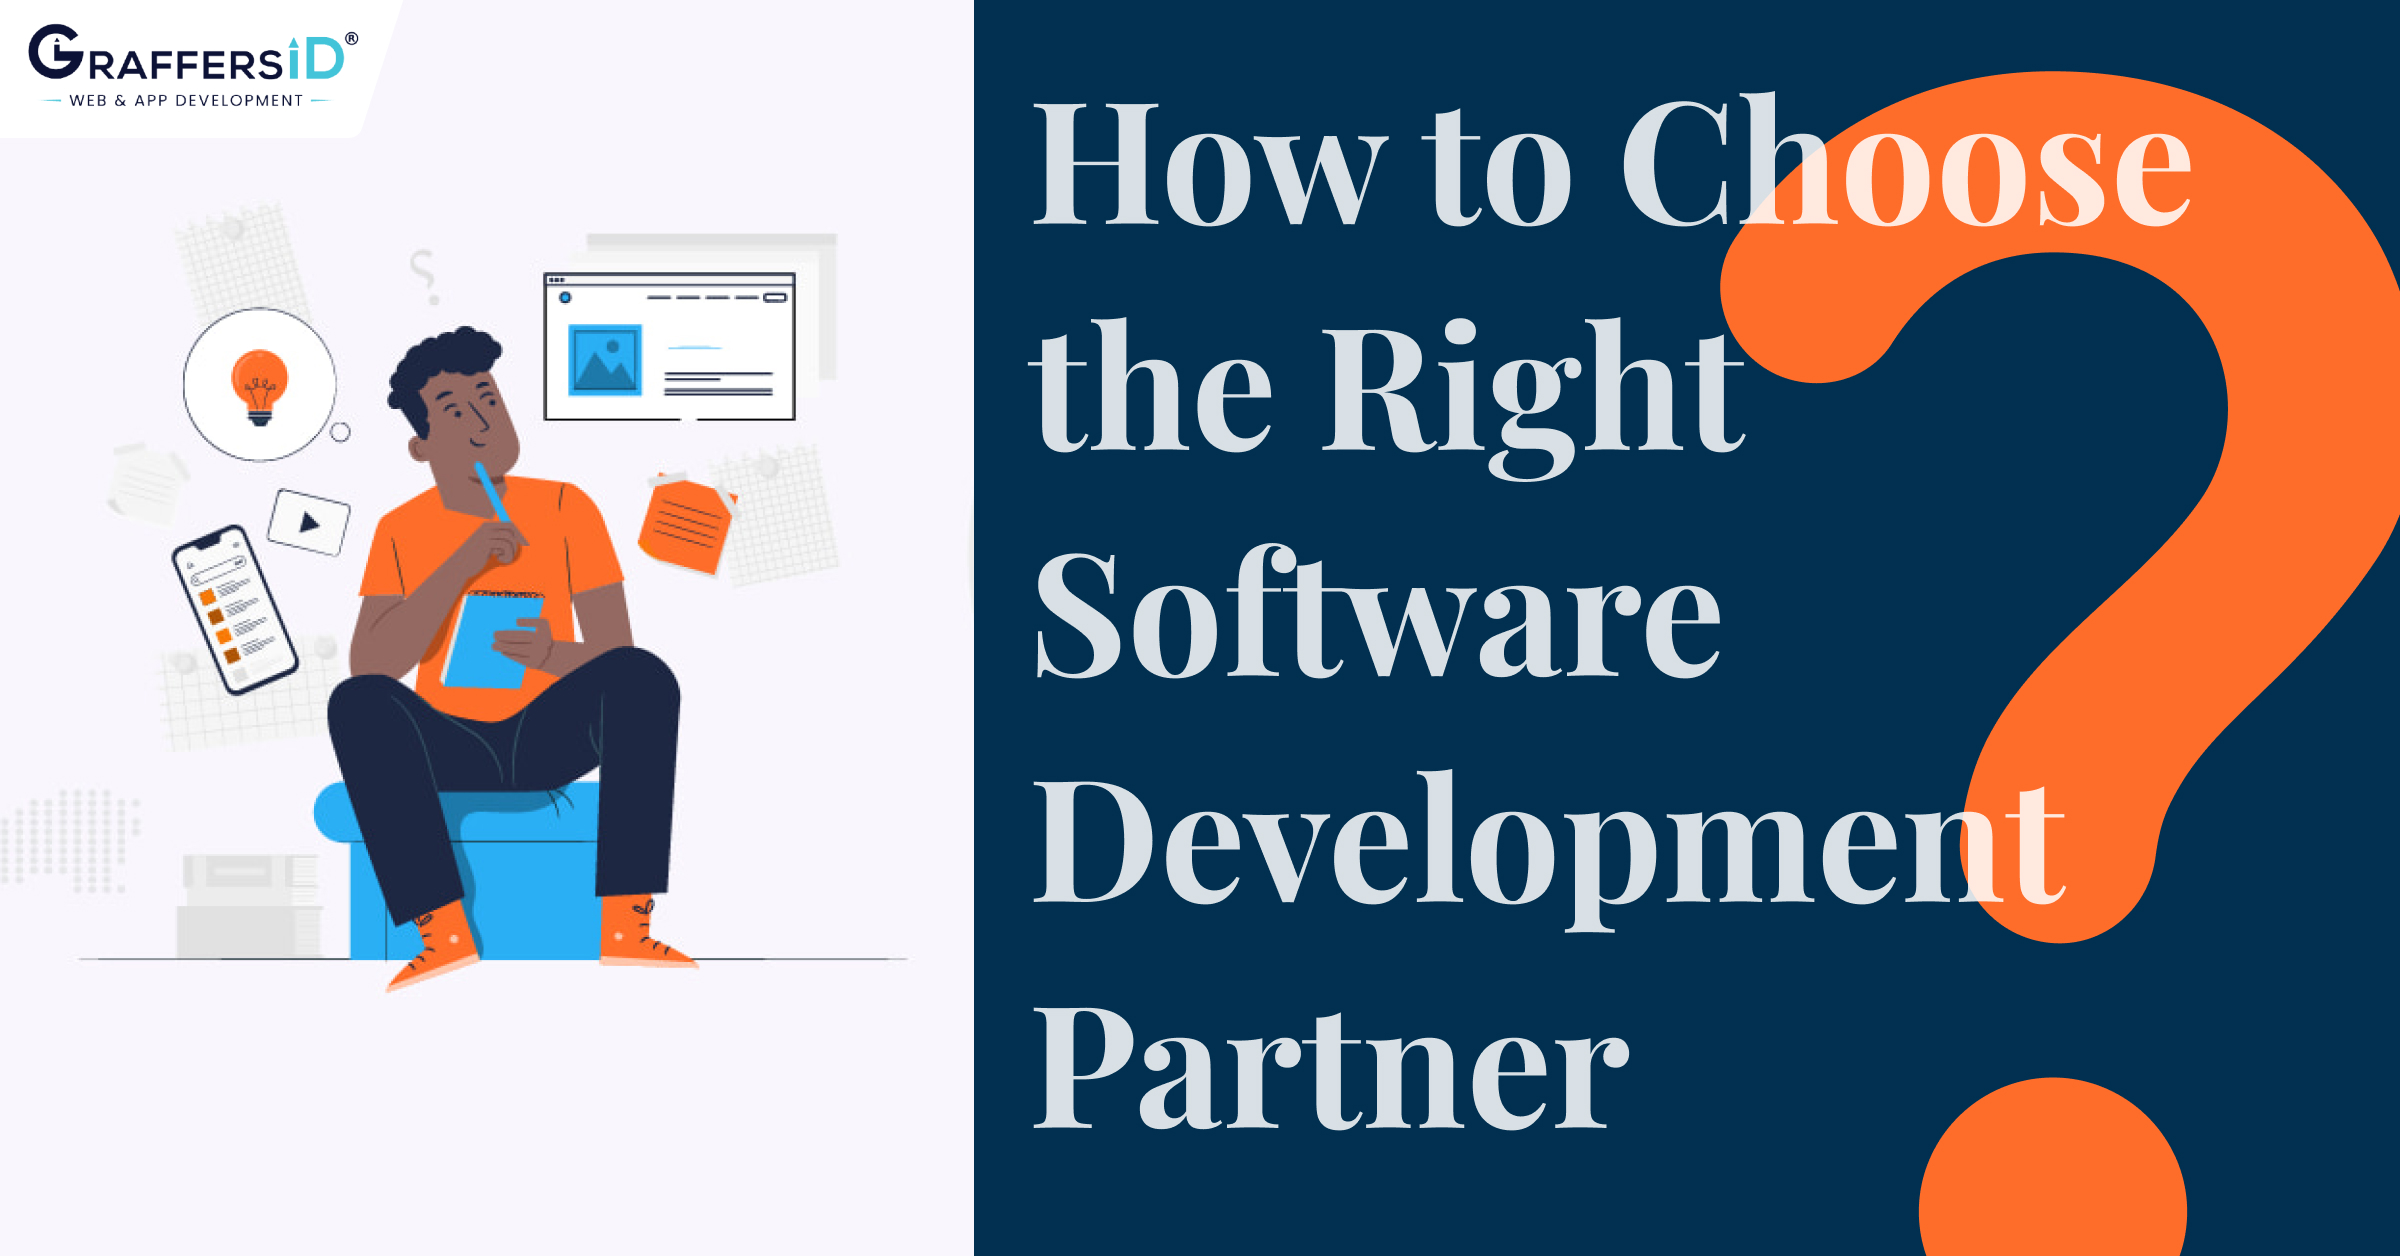 How to Choose the Right Software Development Partner